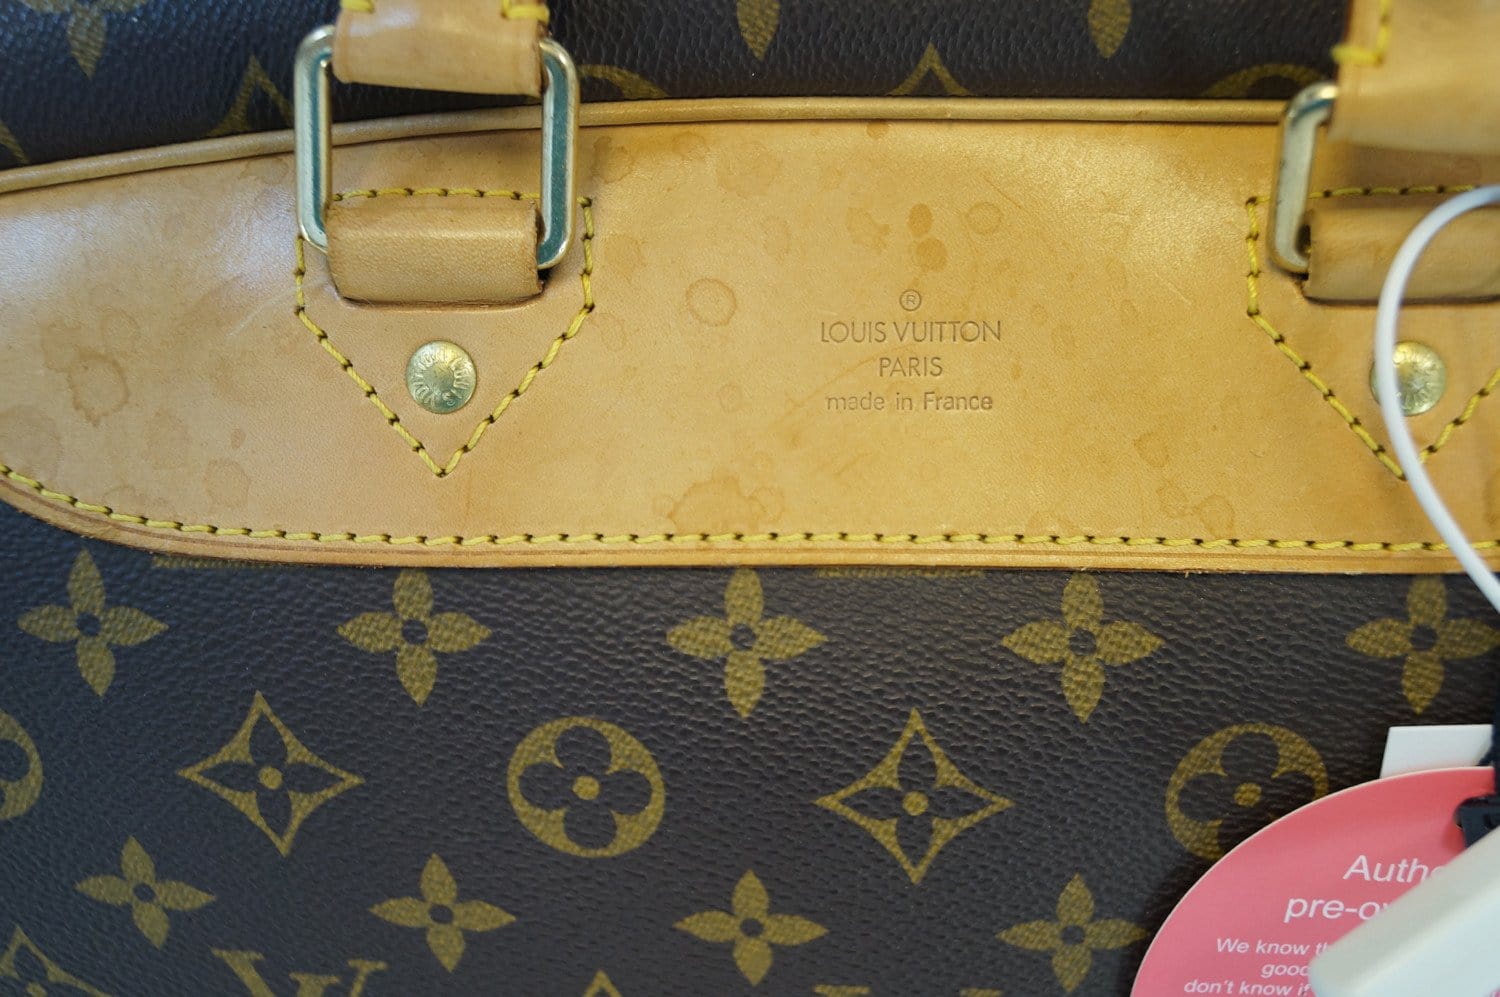 A Guide to Authenticating the Louis Vuitton Evasion (Authenticating Louis  Vuitton) See more